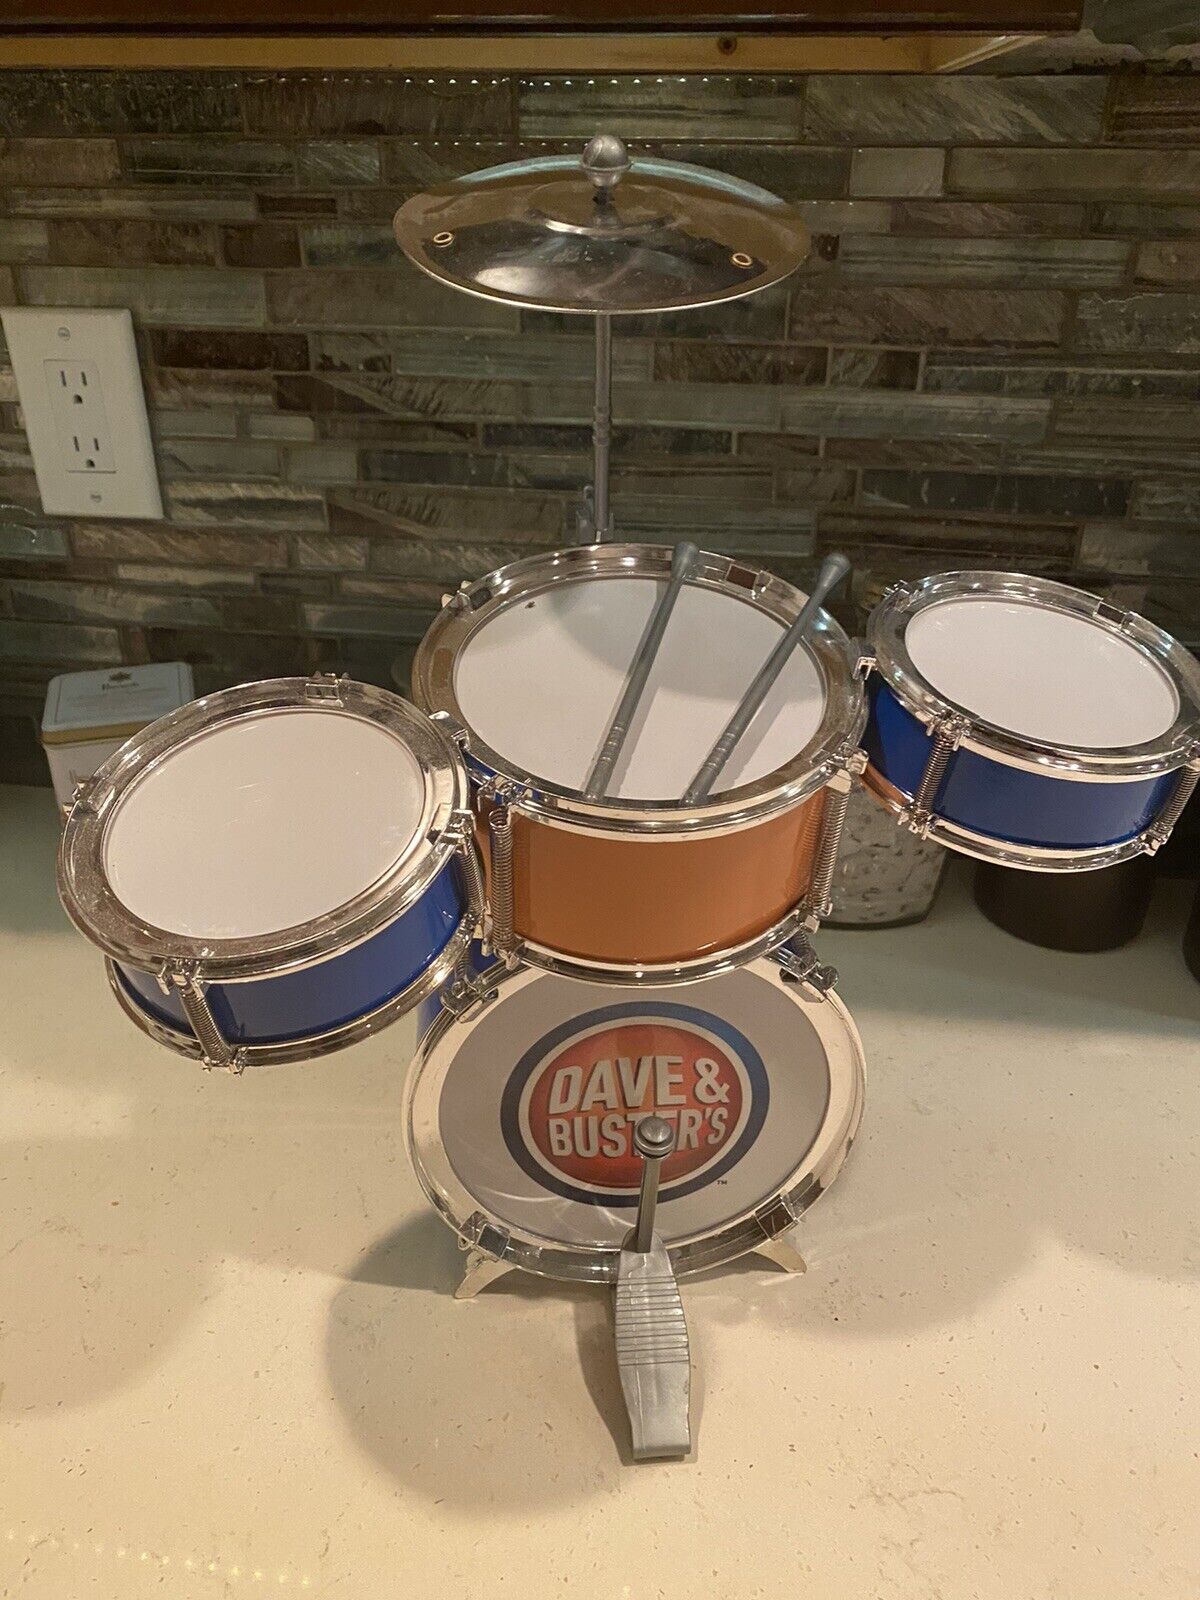 *DAVE & BUSTERS LIMITED EDITION MINI DESK TOP DRUM SET-ONE-OWNER-SIMPLY AWESOME*